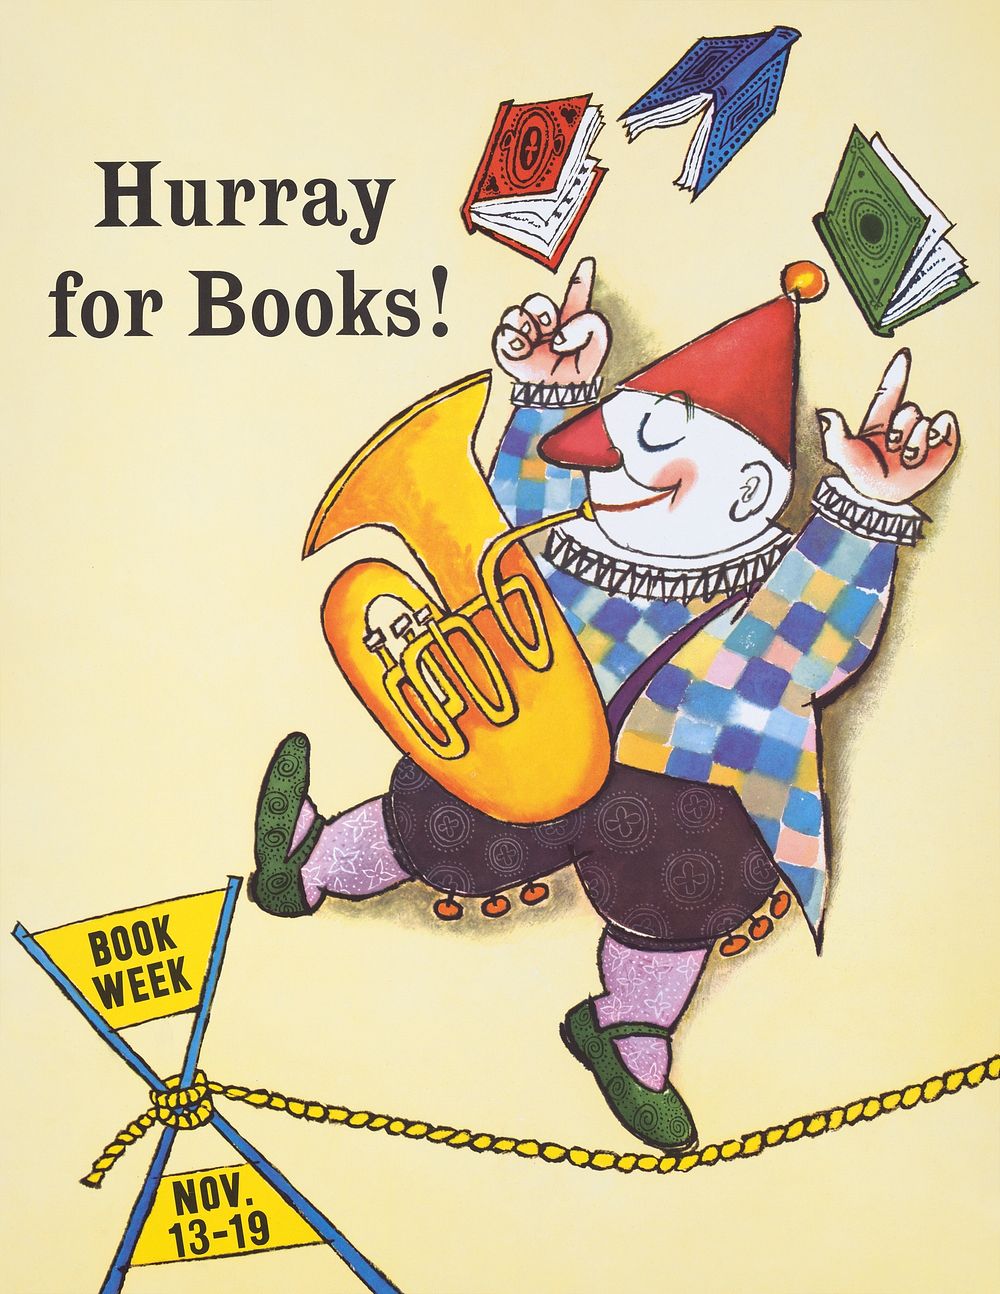 Hurray for books! (1960) vintage poster by Maurice Sendak. Original public domain image from the Library of Congress.…